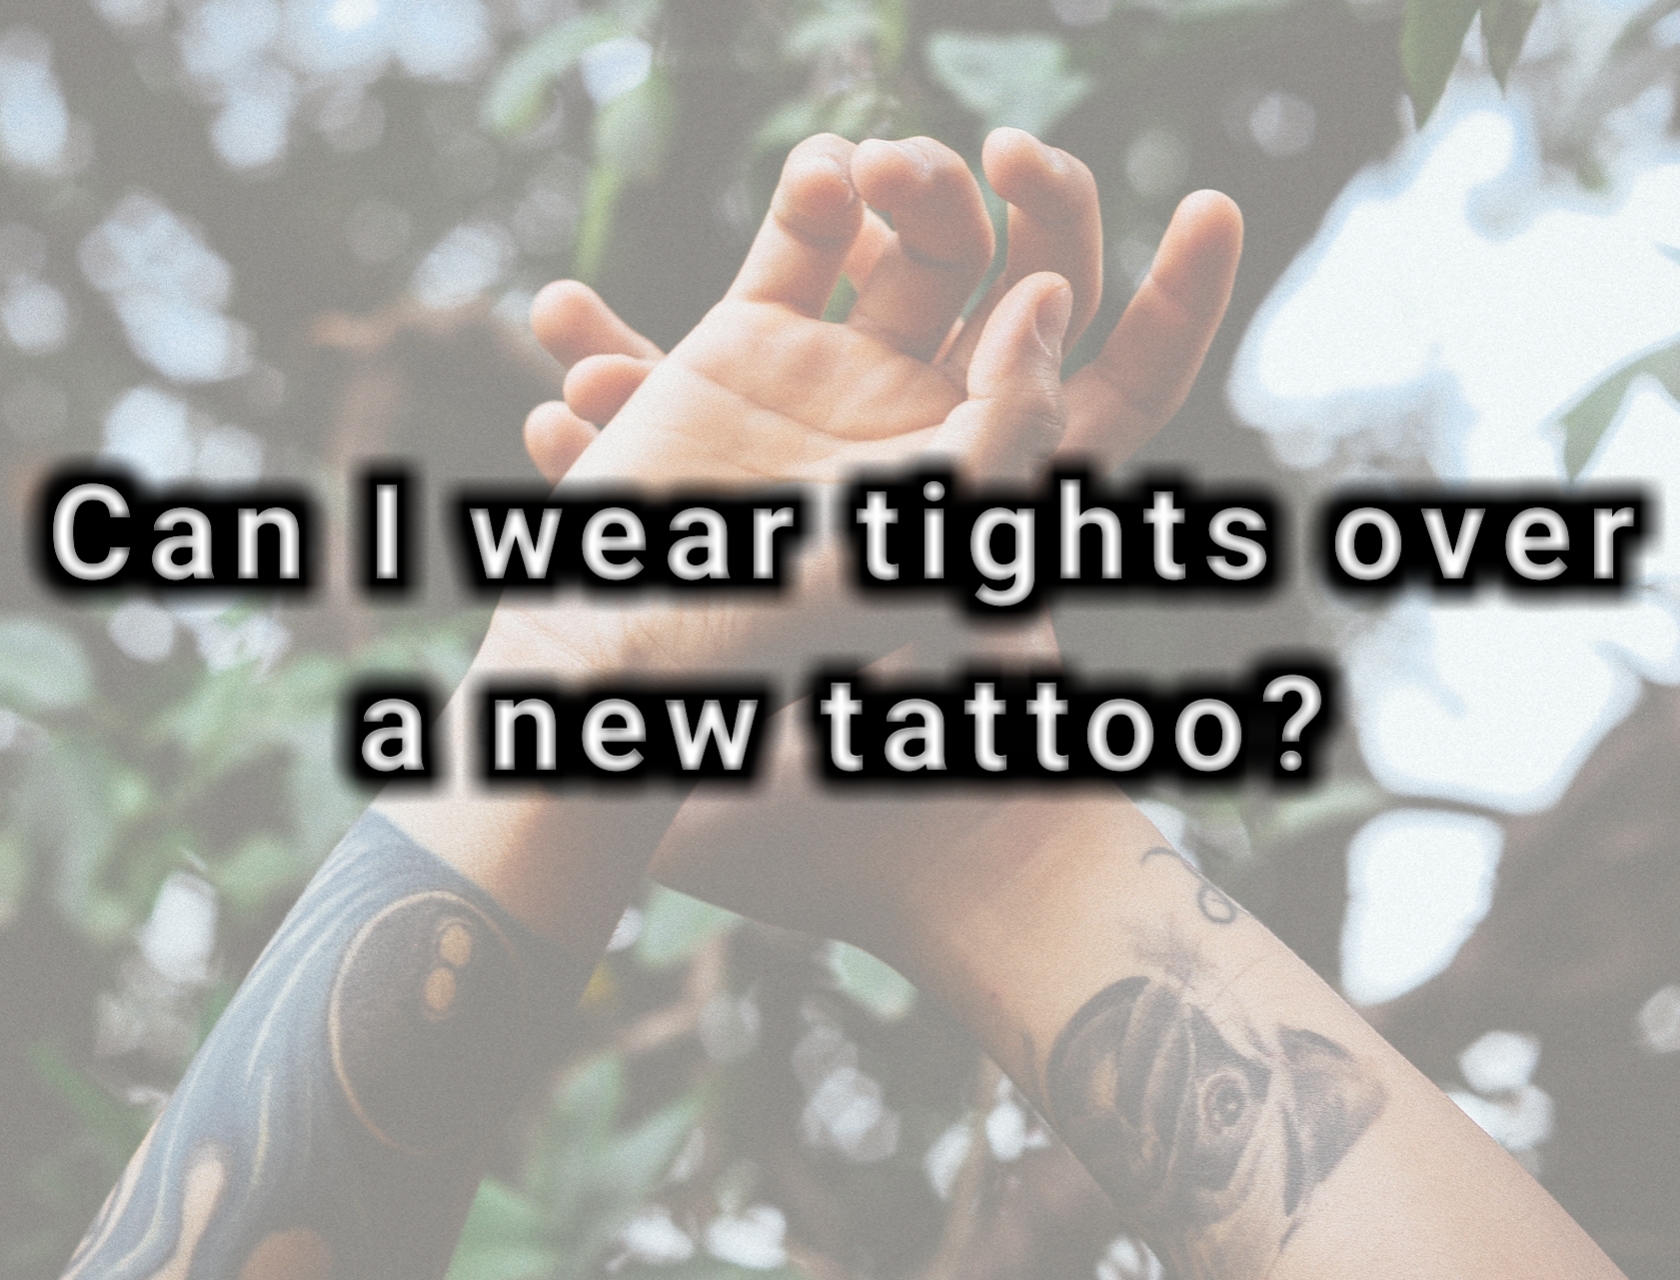 Can I wear tights over a new tattoo